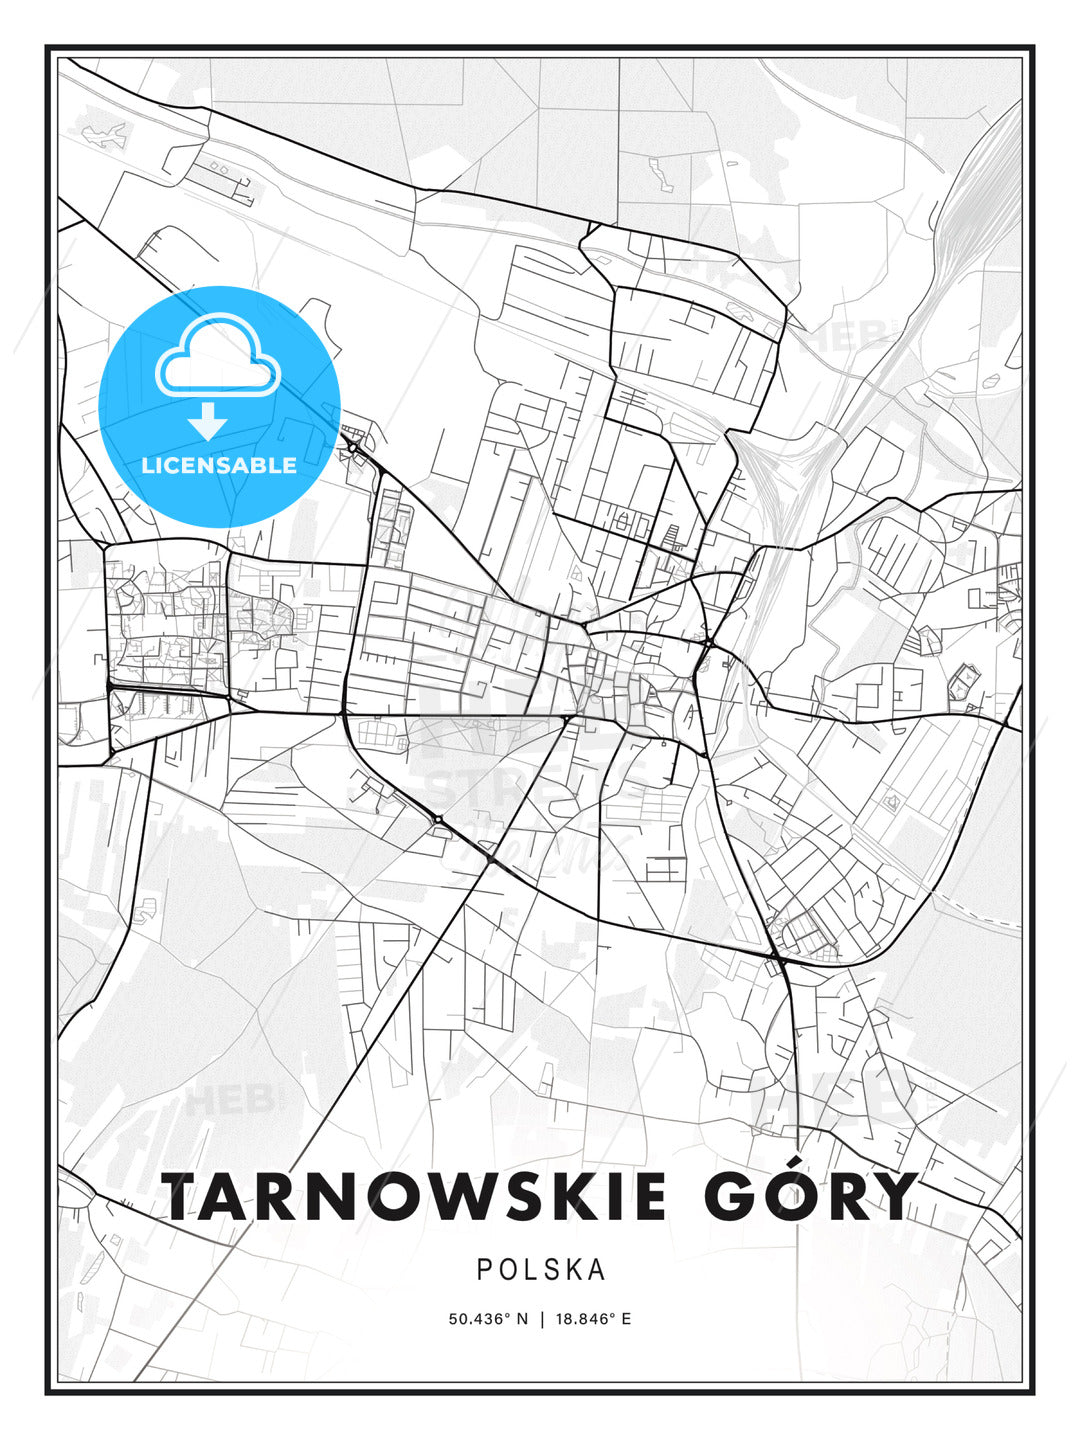 Tarnowskie Góry, Poland, Modern Print Template in Various Formats - HEBSTREITS Sketches